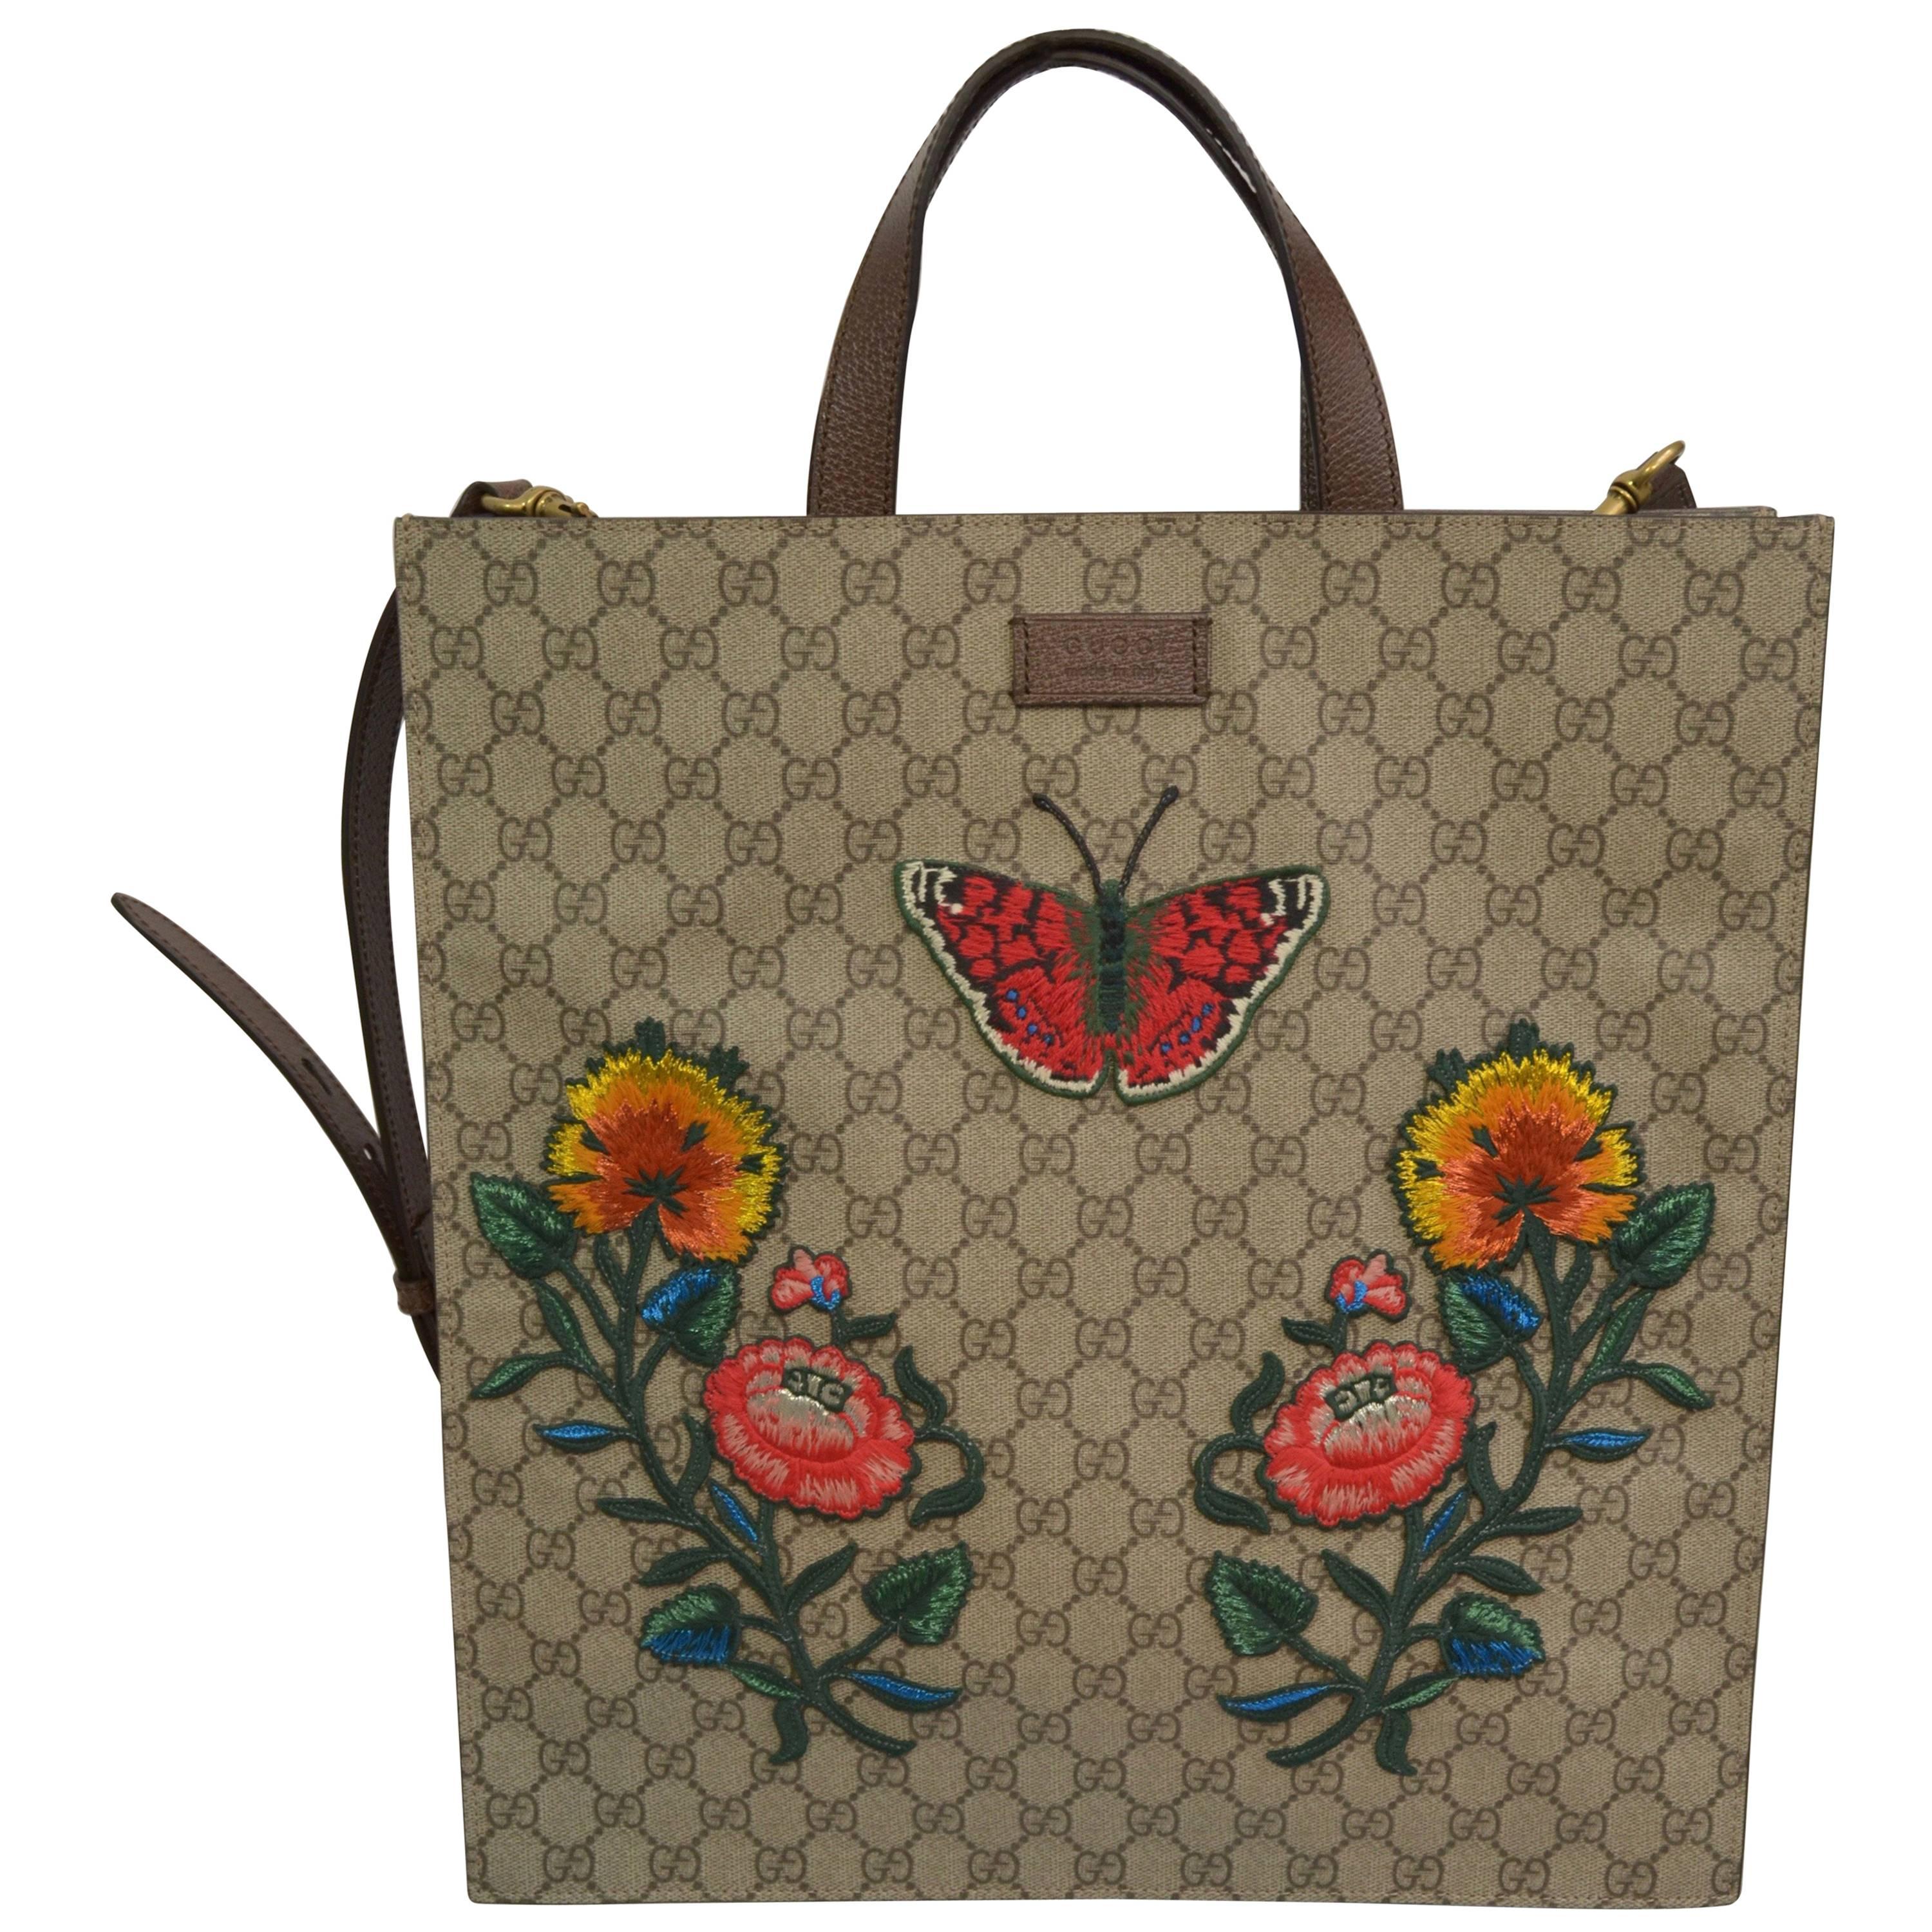 Gucci Supreme Embroidered Butterfly Tote 2016/7